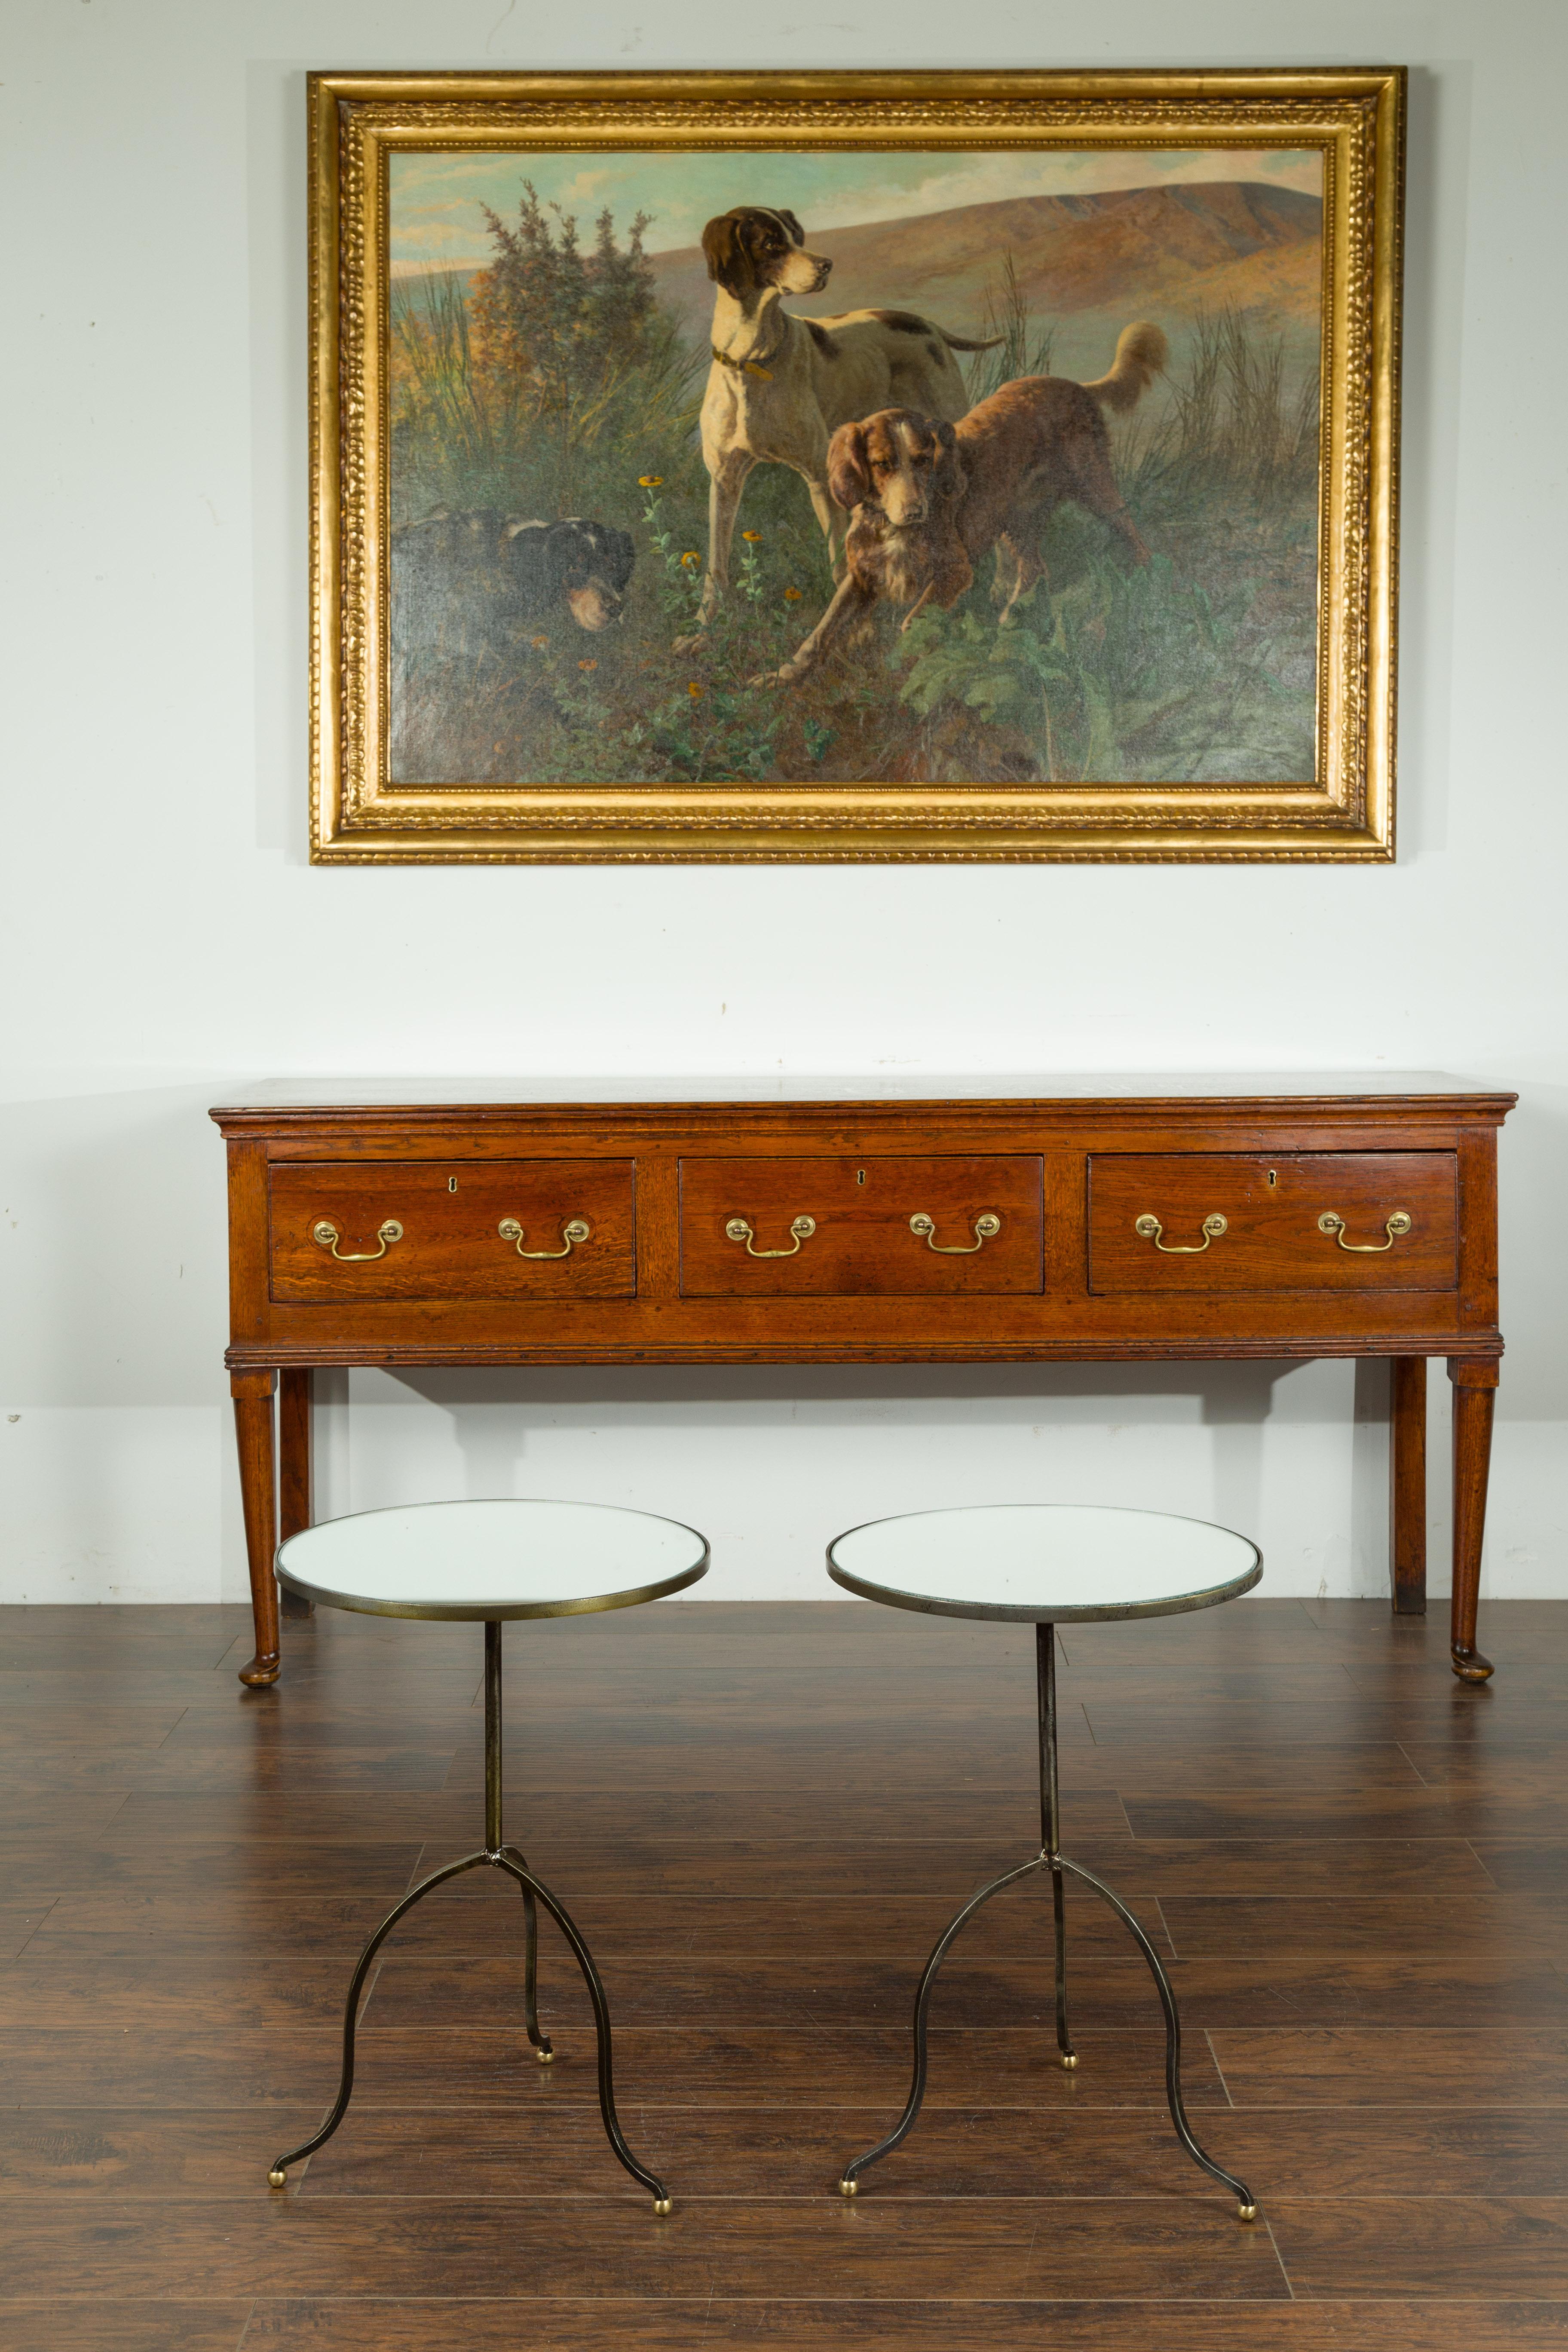 A pair of French vintage steel side tables from the mid-20th century, with mirrored tops.  Created in France during the midcentury period, this pair of small tables features a circular mirrored top resting on a pedestal. The ensemble is raised on a